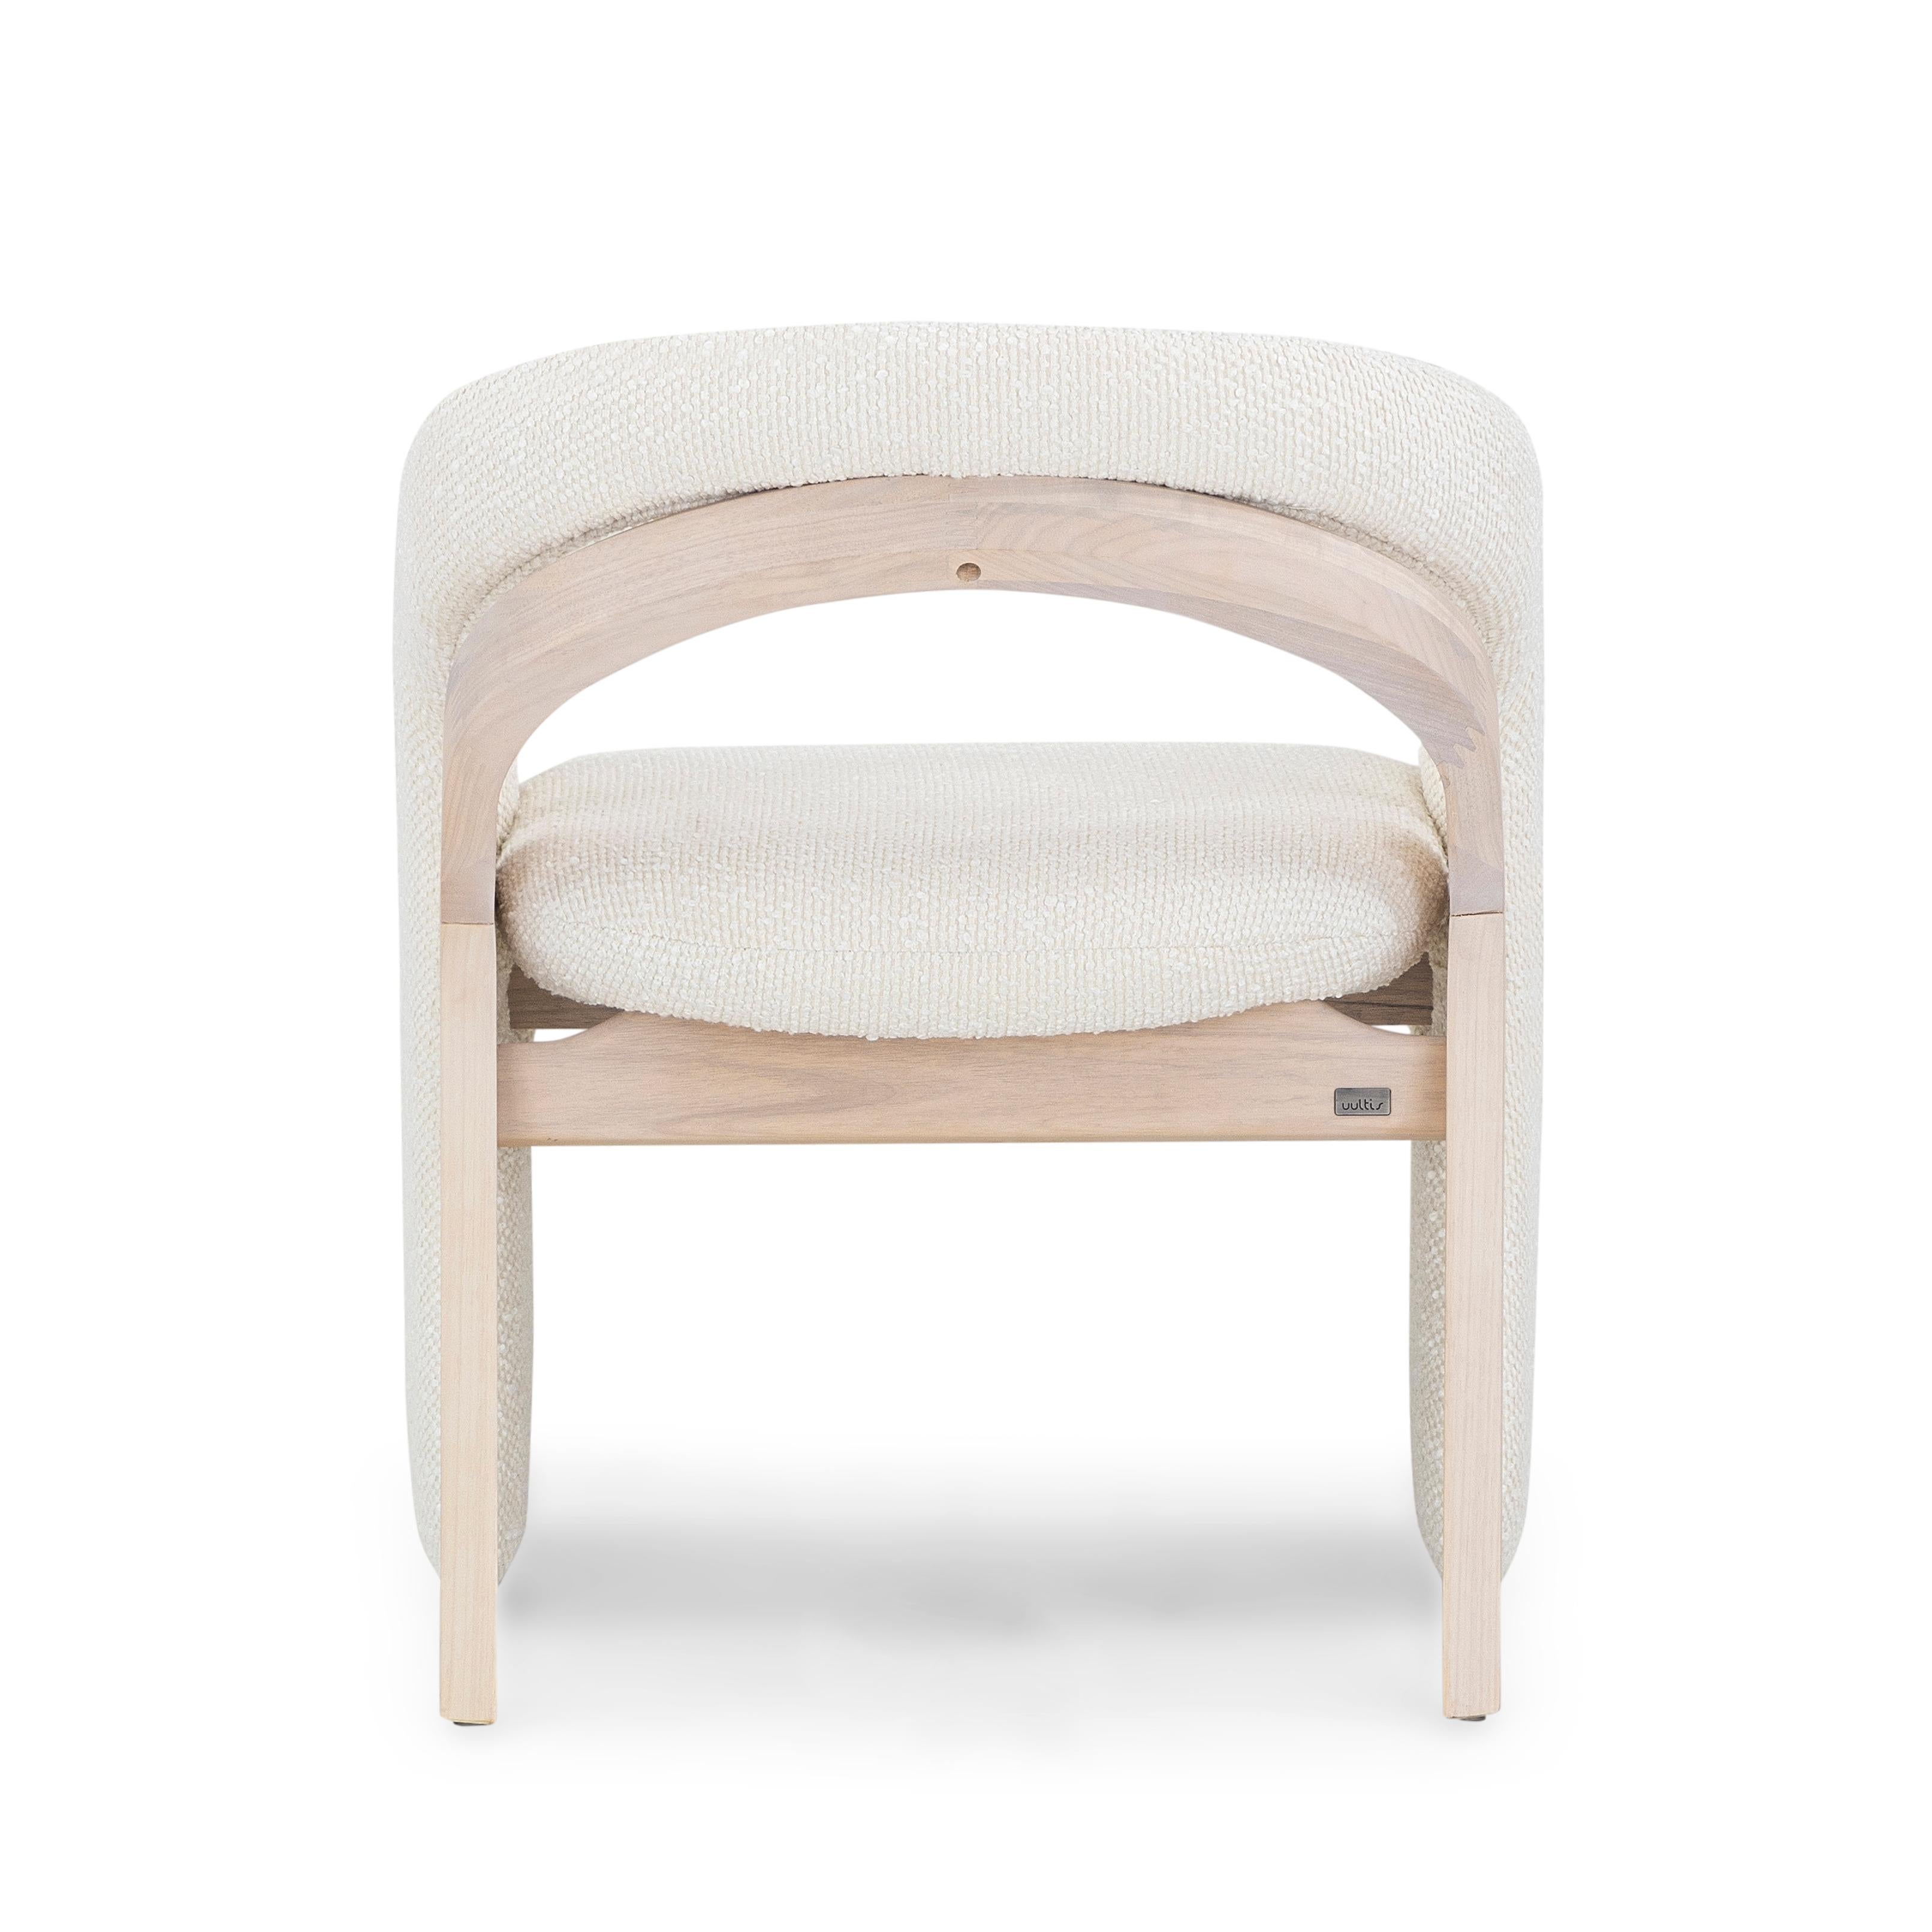 Olga Contemporary Dining Chair in Whitewash Wood Finish and White Boucle Fabric In New Condition For Sale In Miami, FL